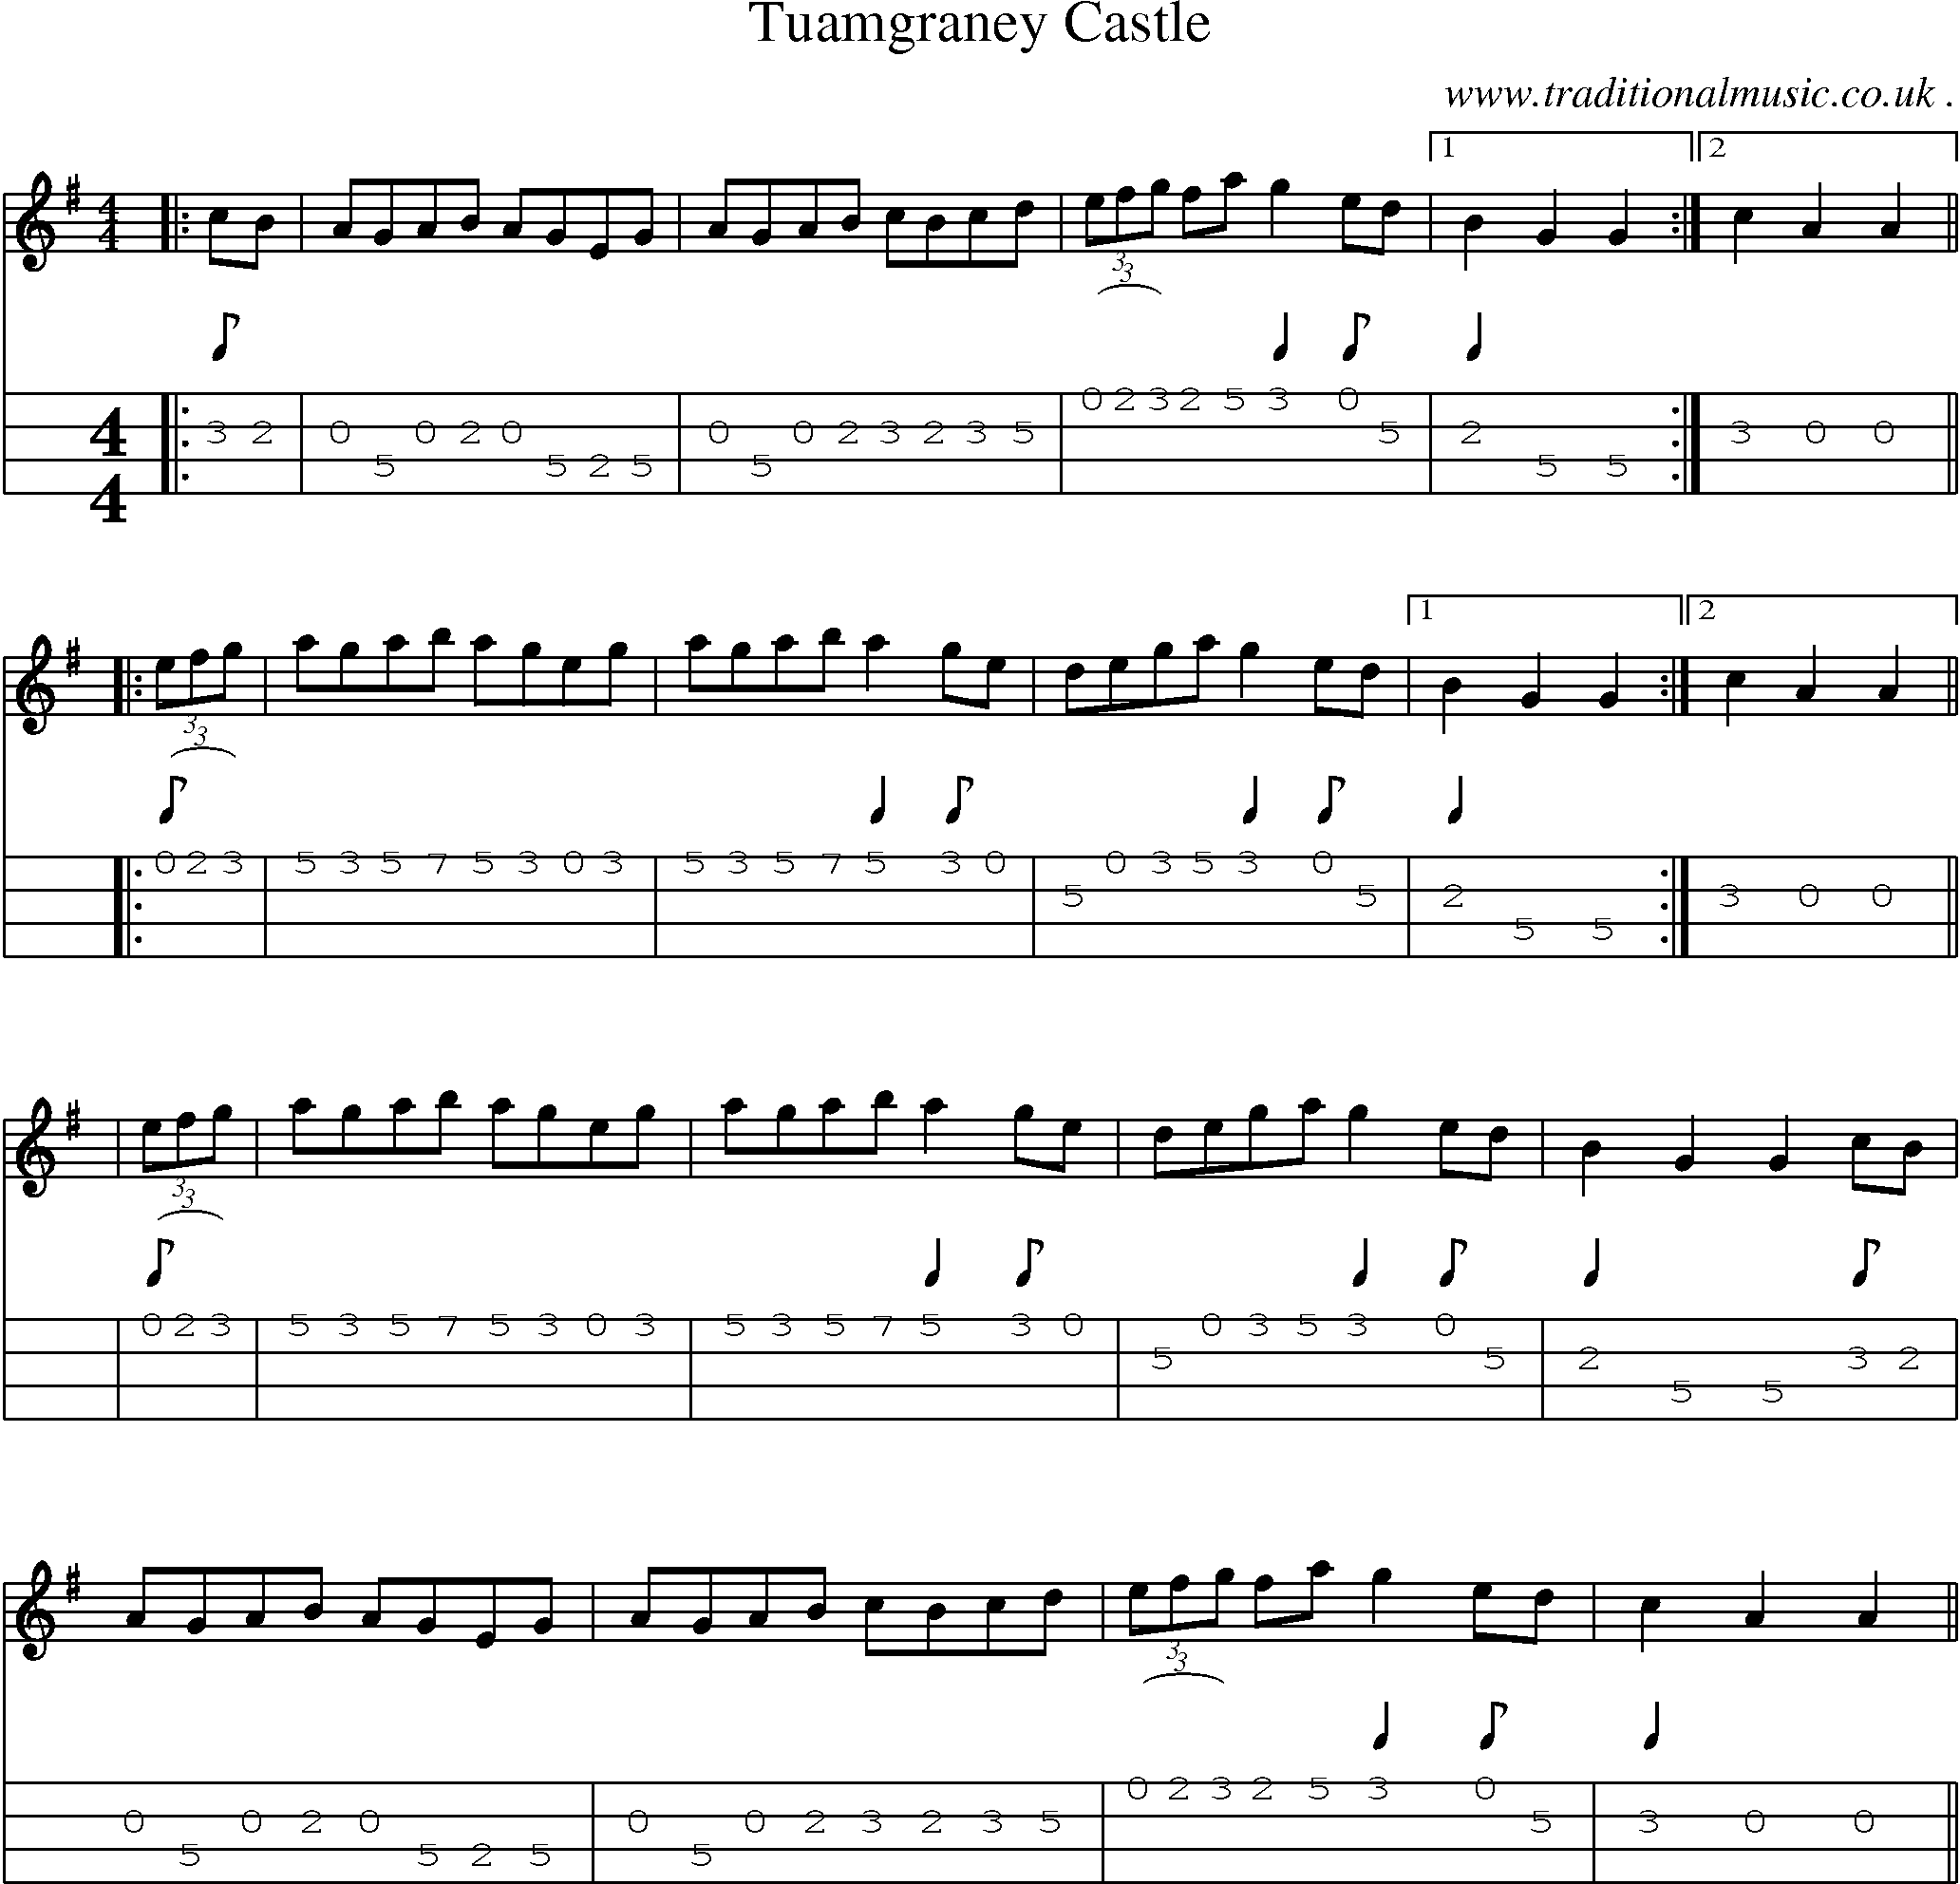 Sheet-Music and Mandolin Tabs for Tuamgraney Castle